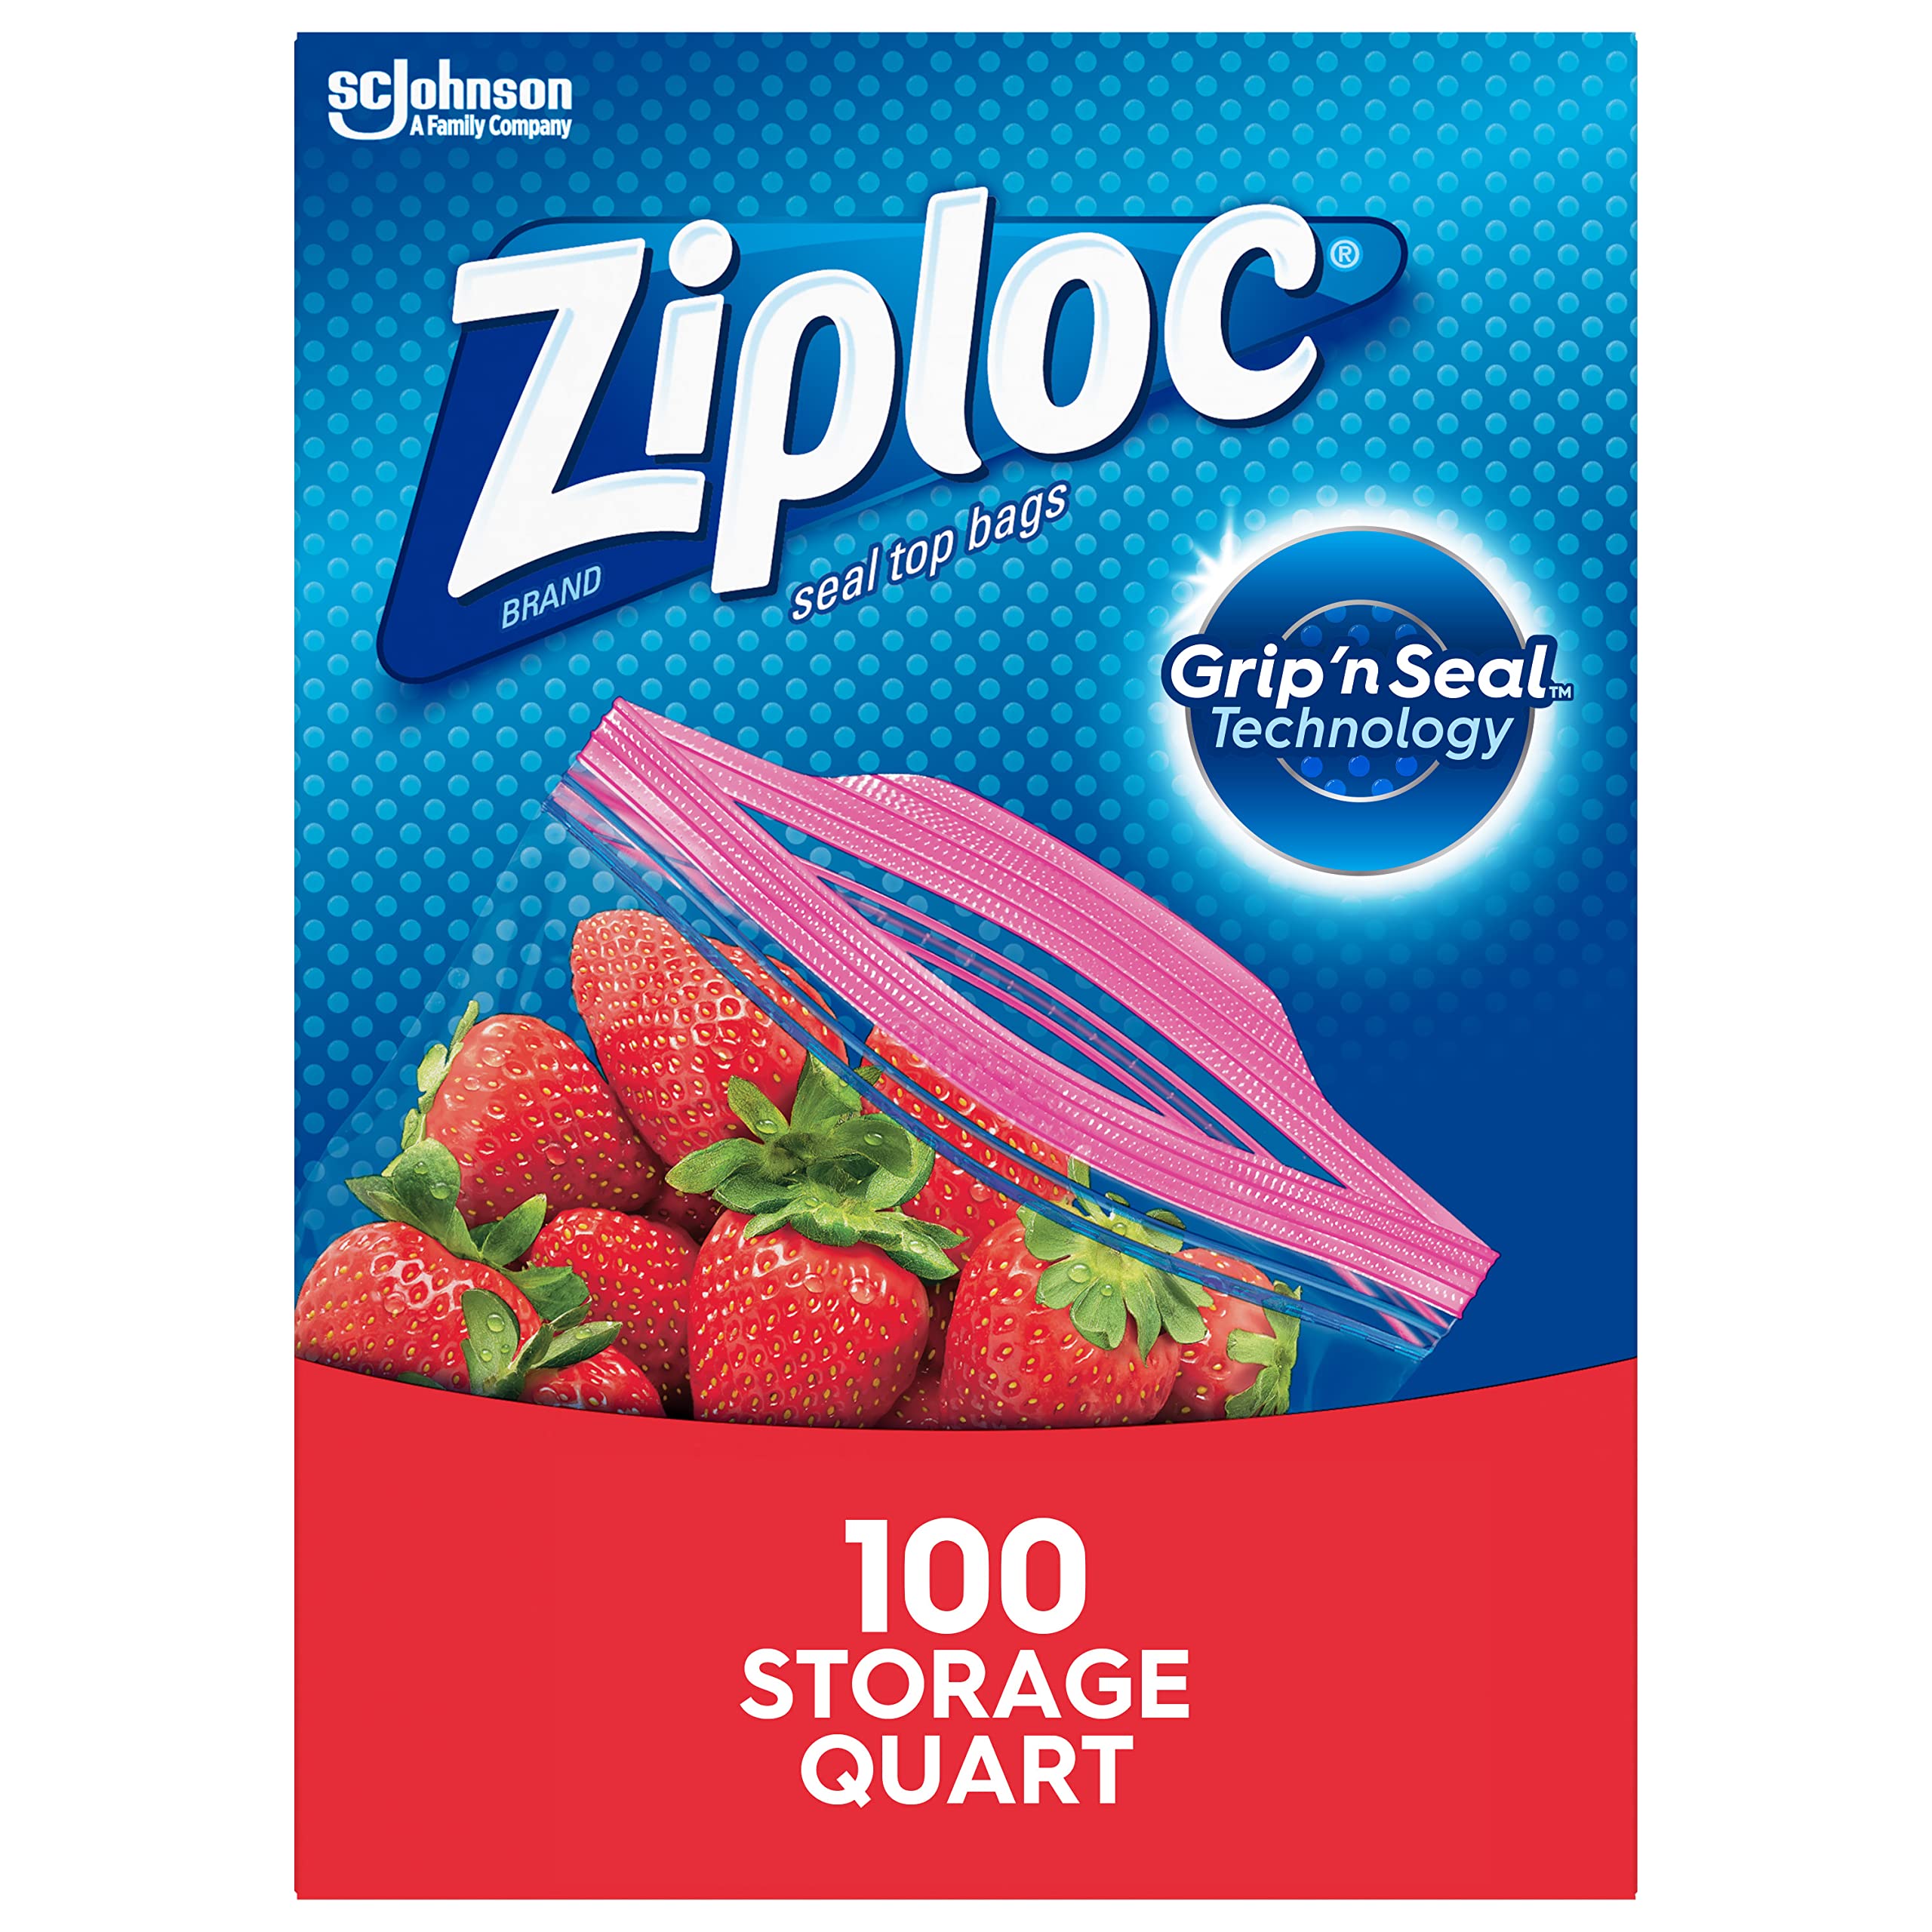 Ziploc Brand Storage Quart Bags with Grip 'n Seal Technology, 25 Count